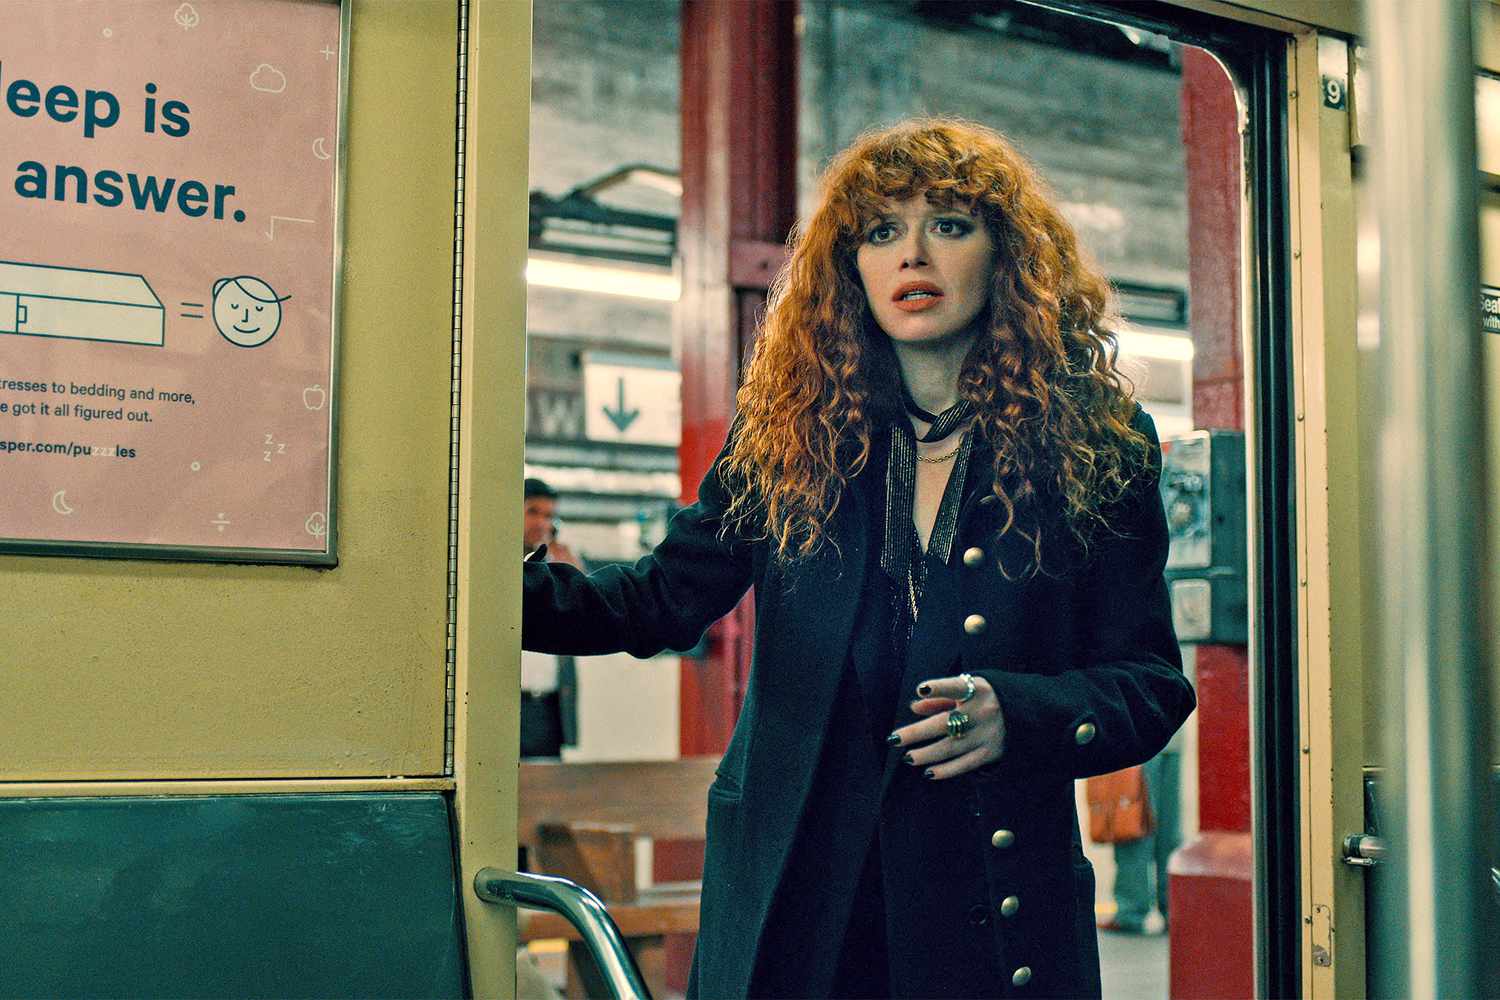 Find out when Russian Doll season 2 drops in mind-bending new teaser |  EW.com